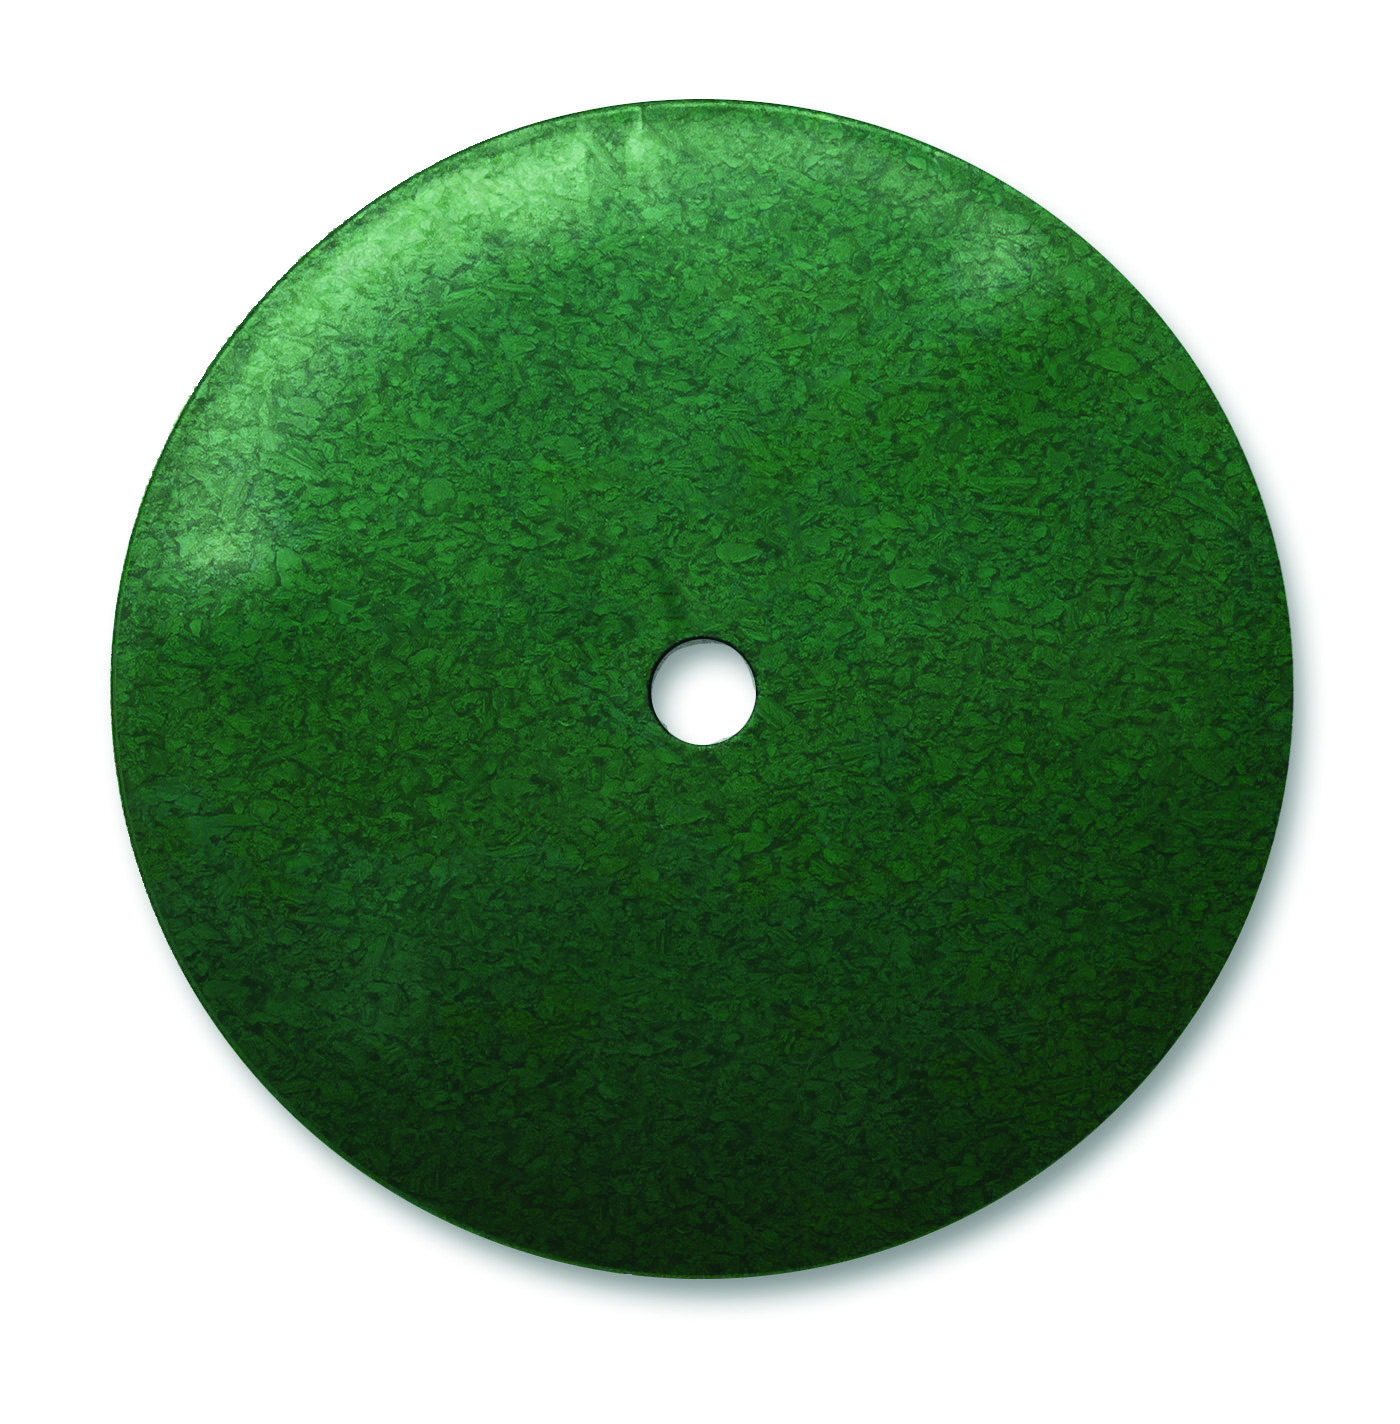 Hole Cup Covers, Golf Course